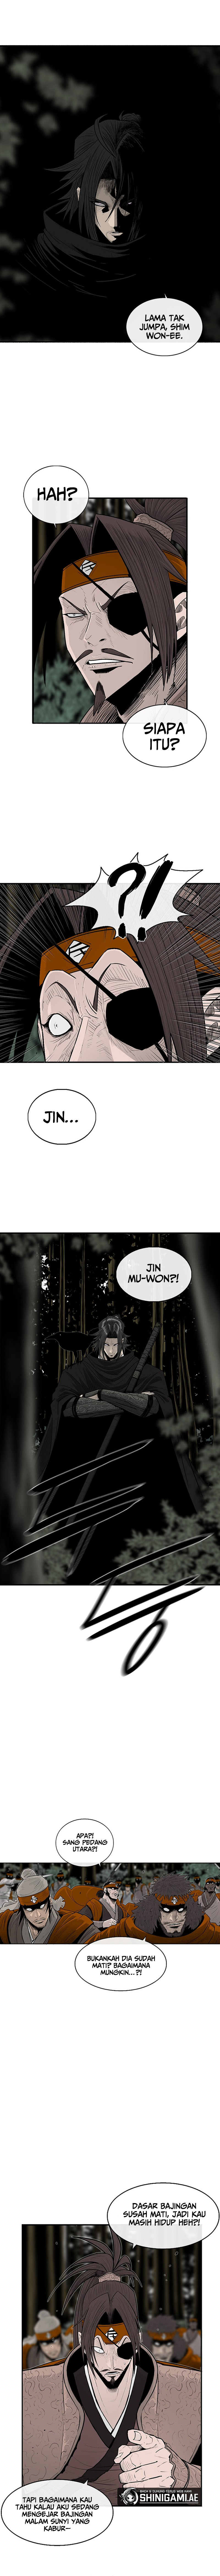 legend-of-the-northern-blade Chapter 167